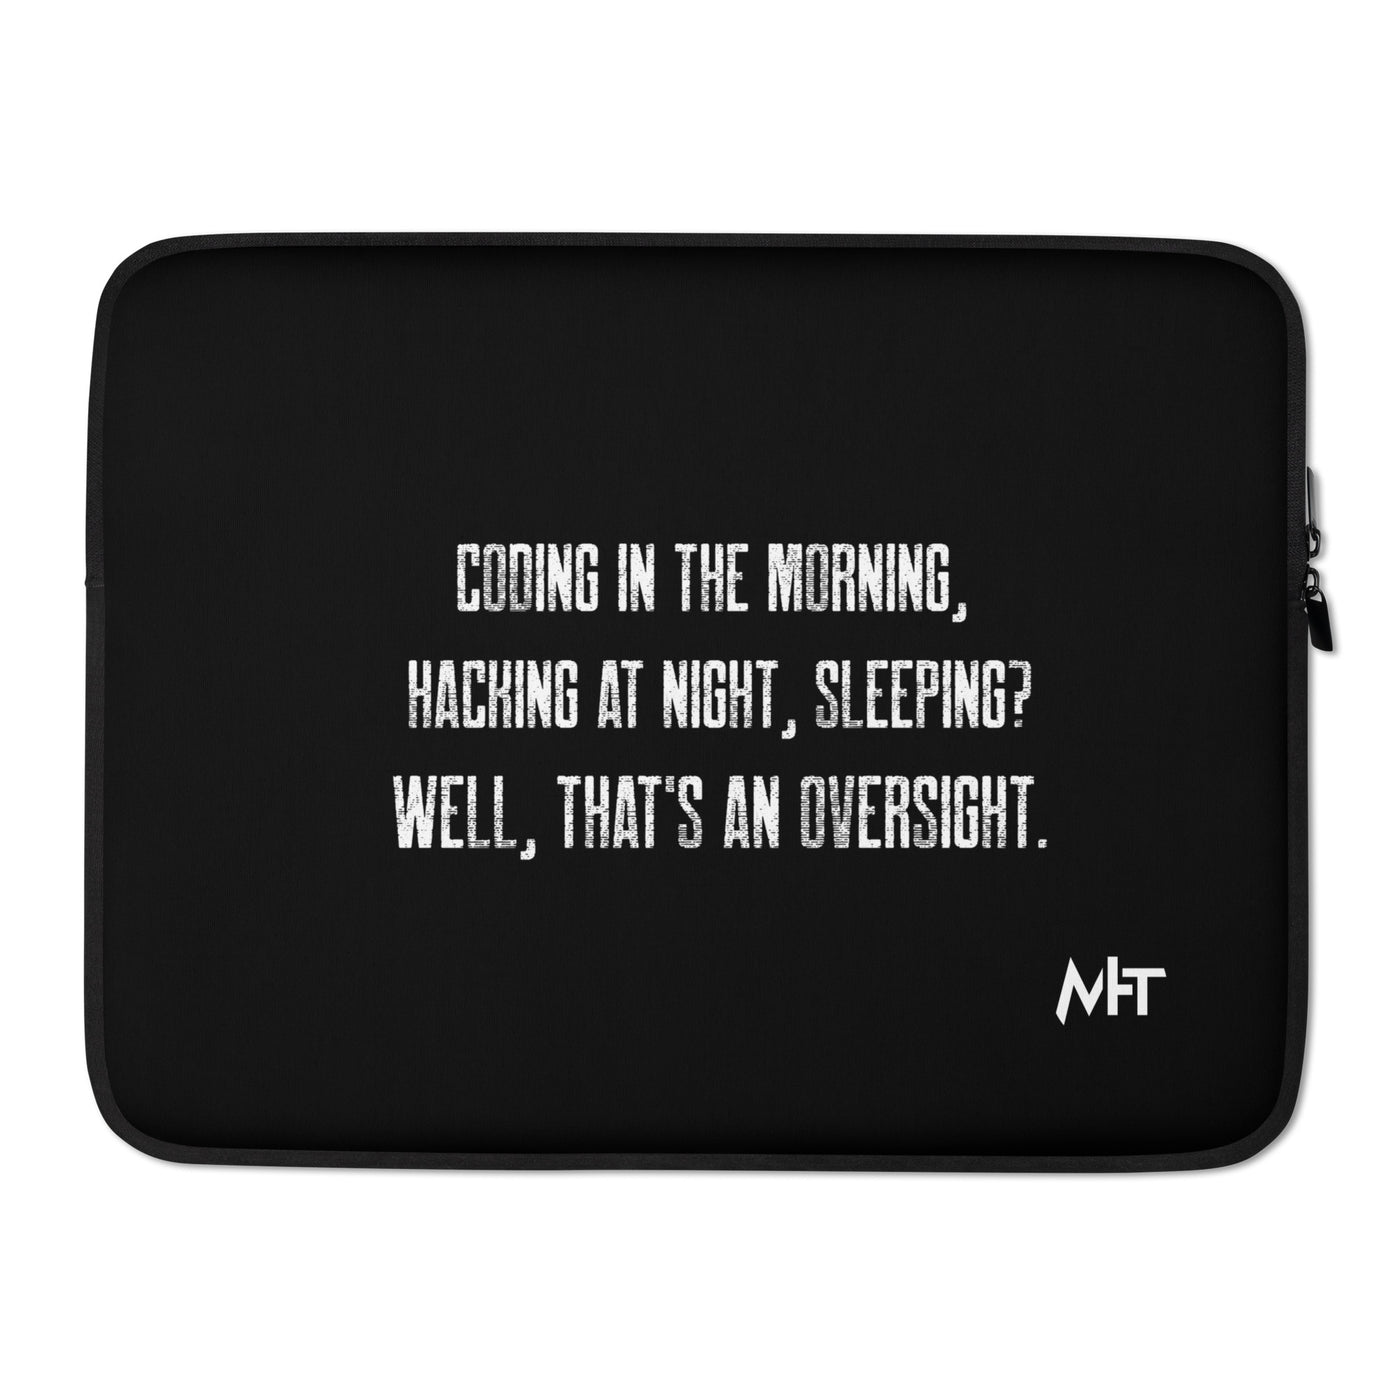 Coding in the morning, hacking at night V1 - Laptop Sleeve